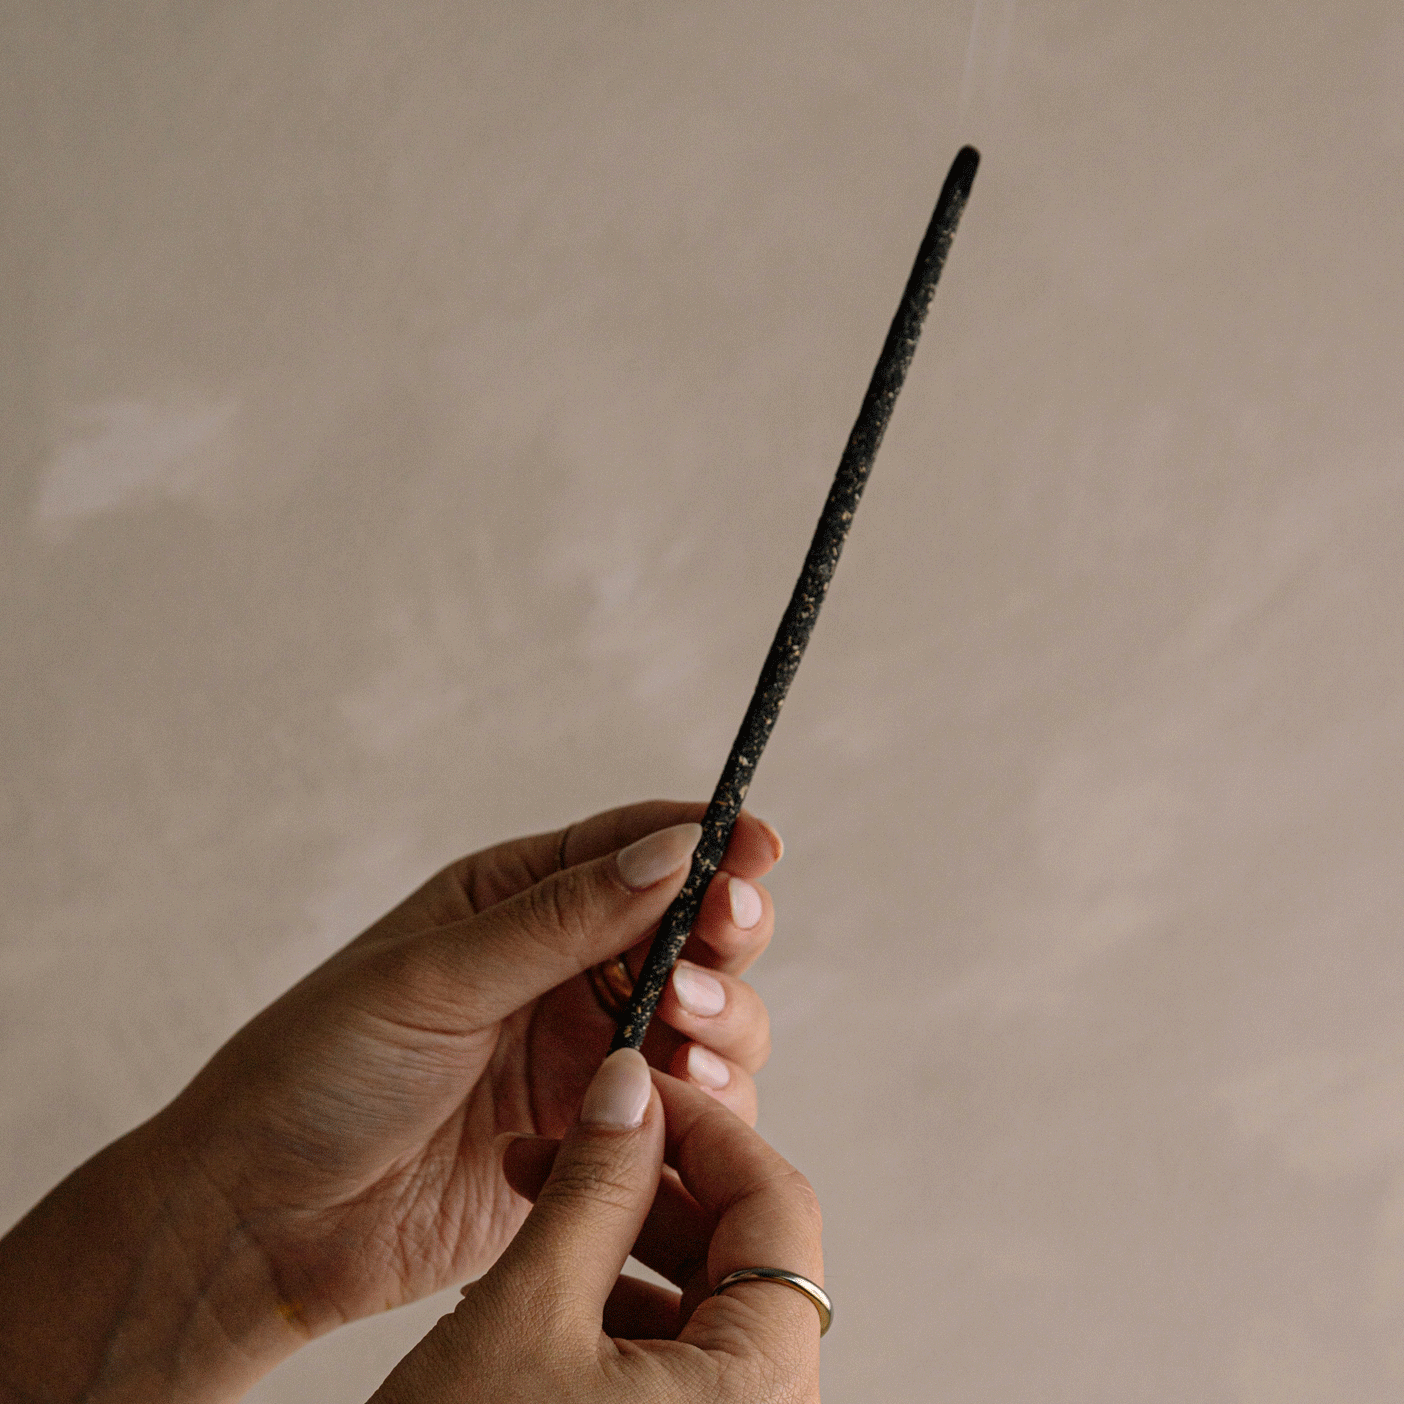 A gif showing the process of burning an incense.